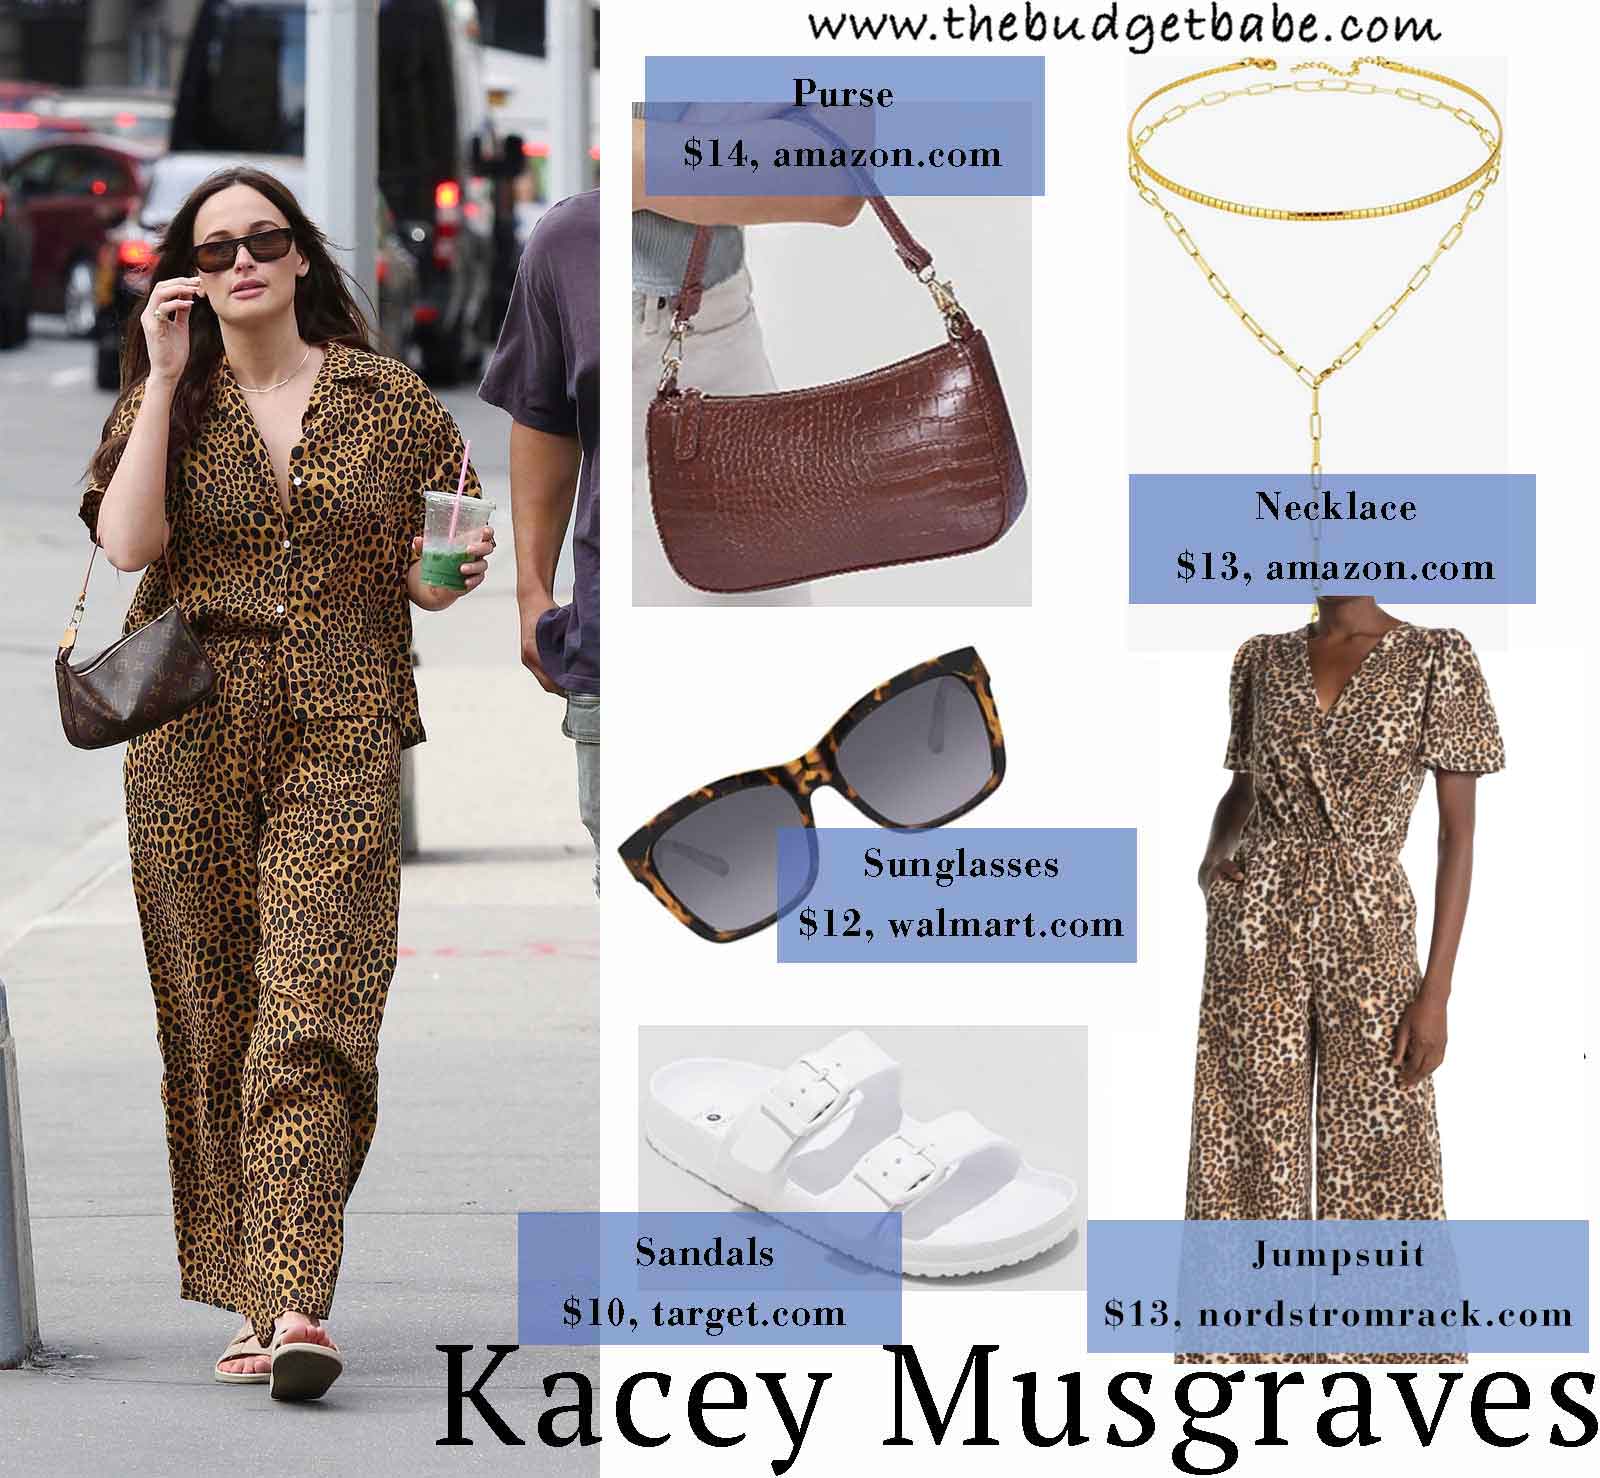 Kacey Musgraves' Leopard Set and Double Strap Slides Look for Less